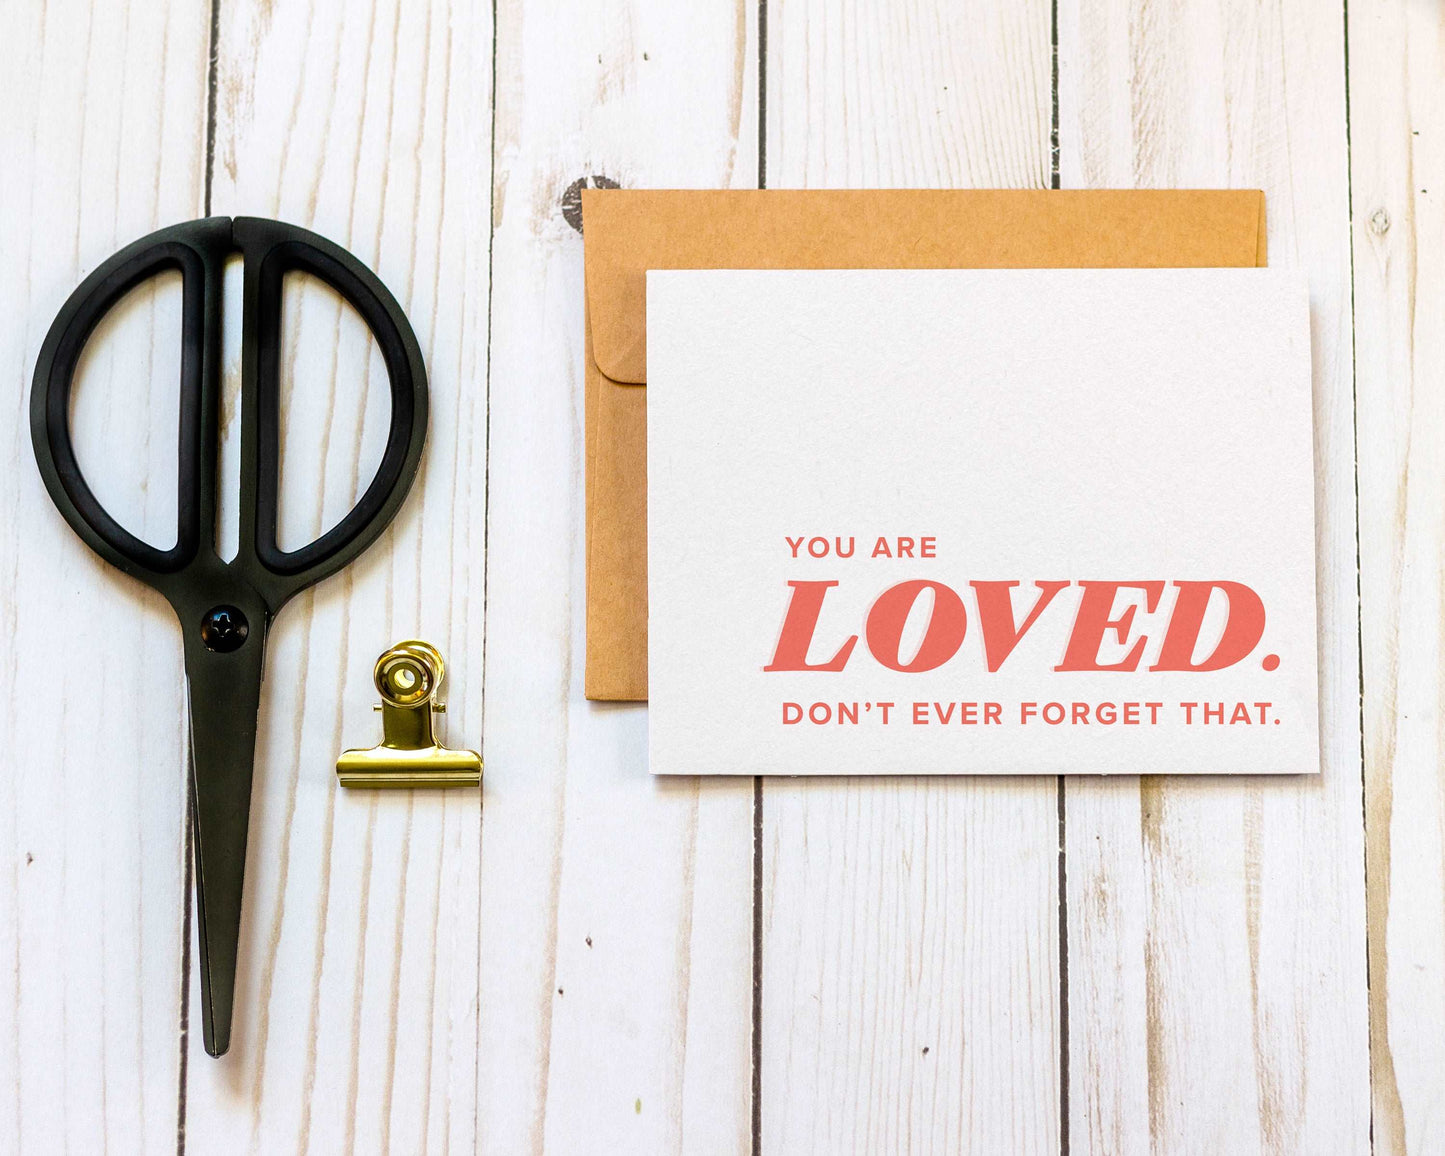 You are Loved Card | Sympathy Condolence Bereavement Mourning Greeting Card